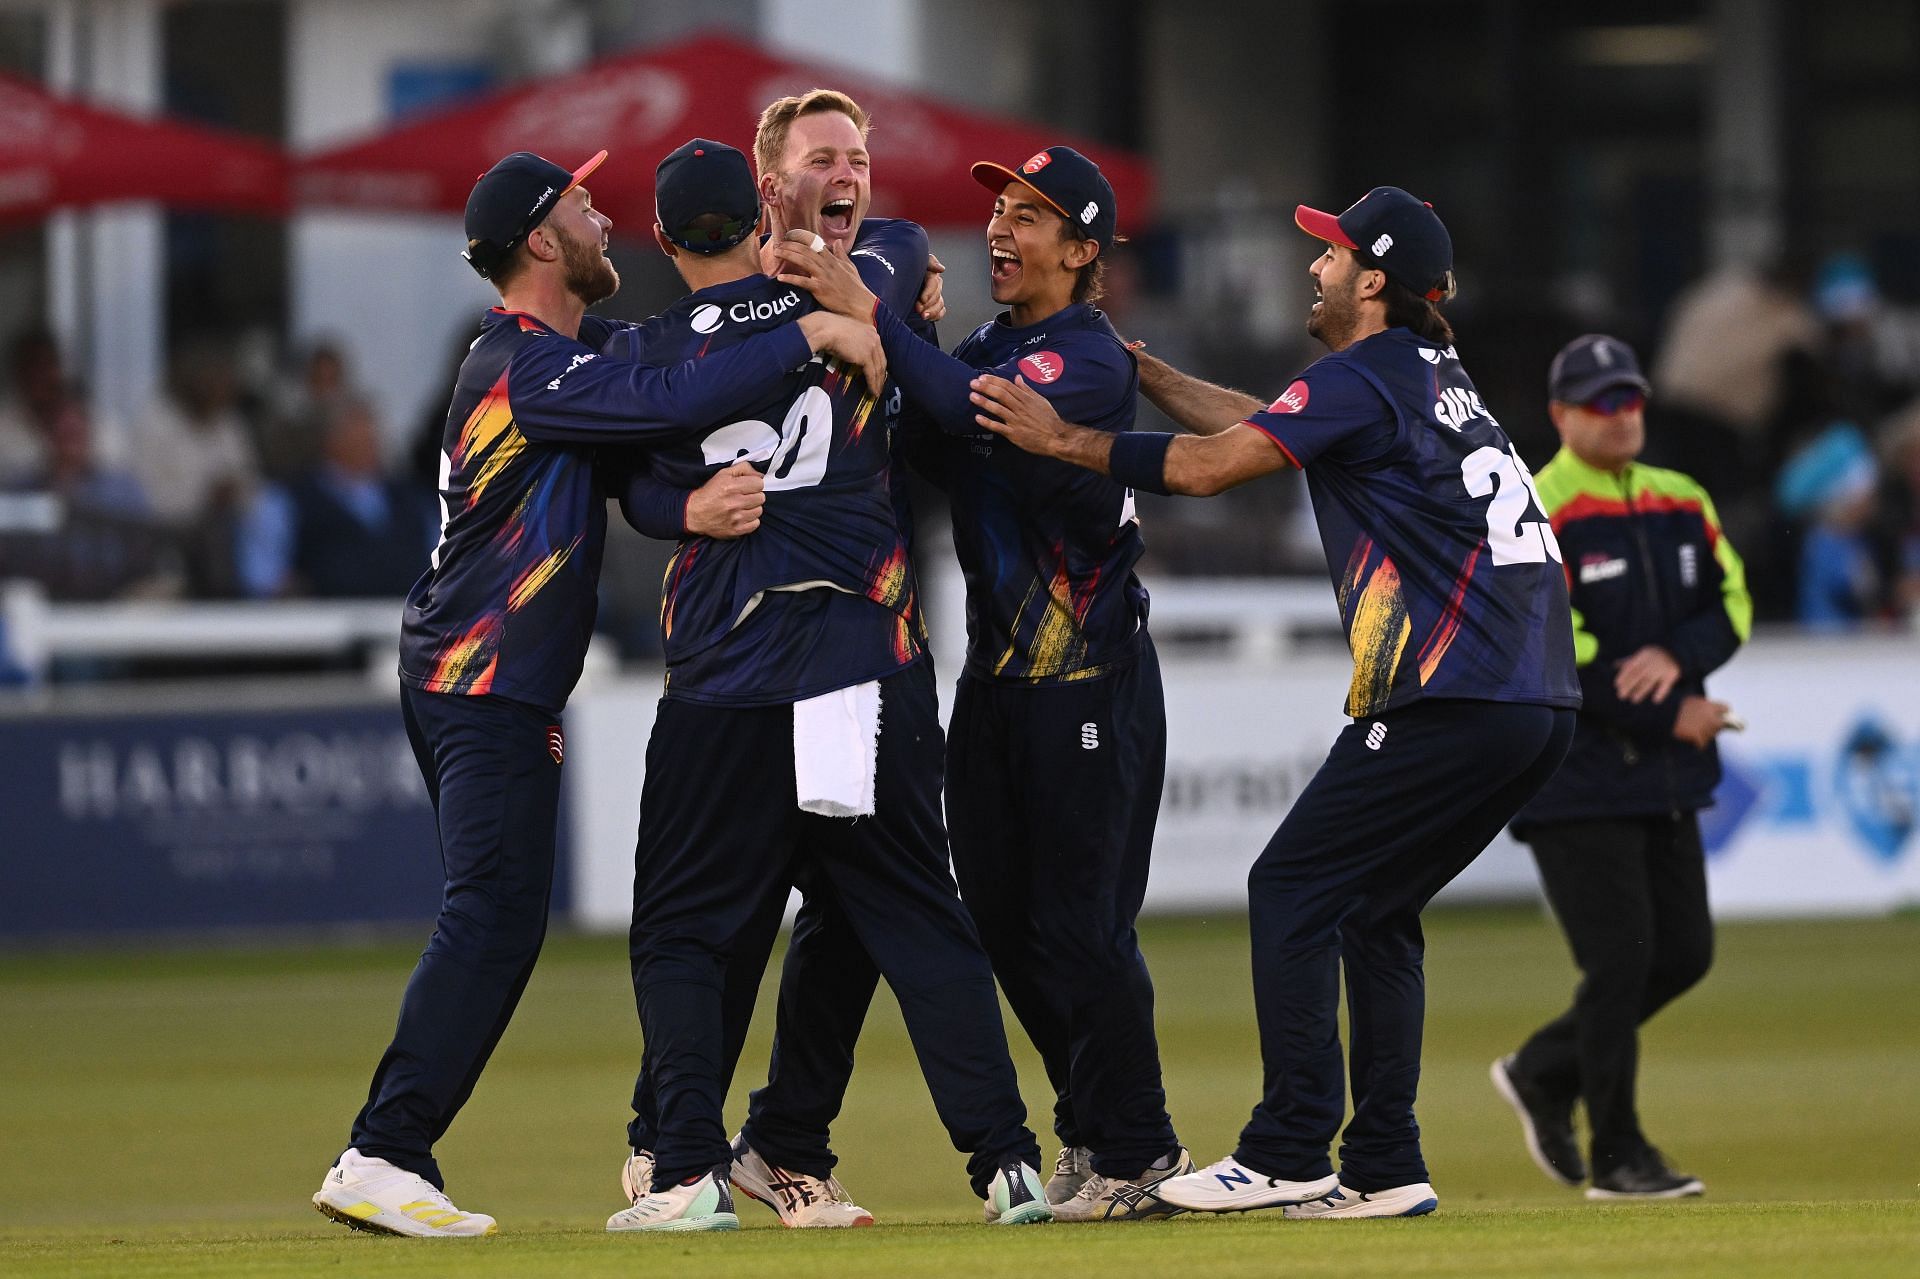 Vitality T20 Blast 2023, Essex vs Hampshire: Probable XIs, Match Prediction, Pitch Report, Weather Forecast and Live Streaming Details